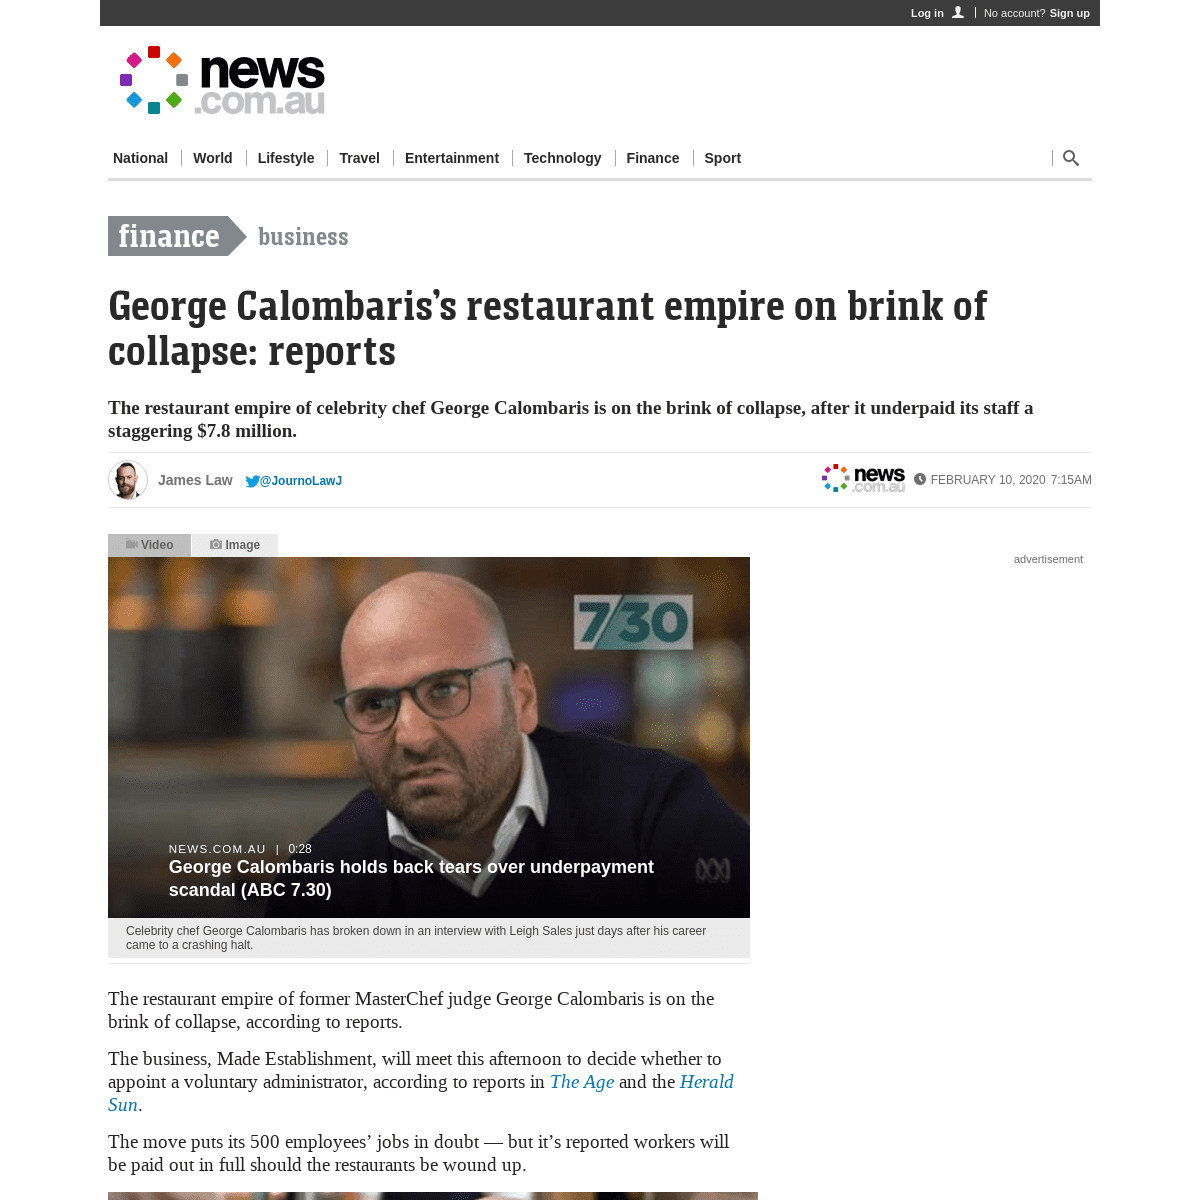 A complete backup of www.news.com.au/finance/business/george-calombariss-restaurant-empire-on-brink-of-collapse-reports/news-sto